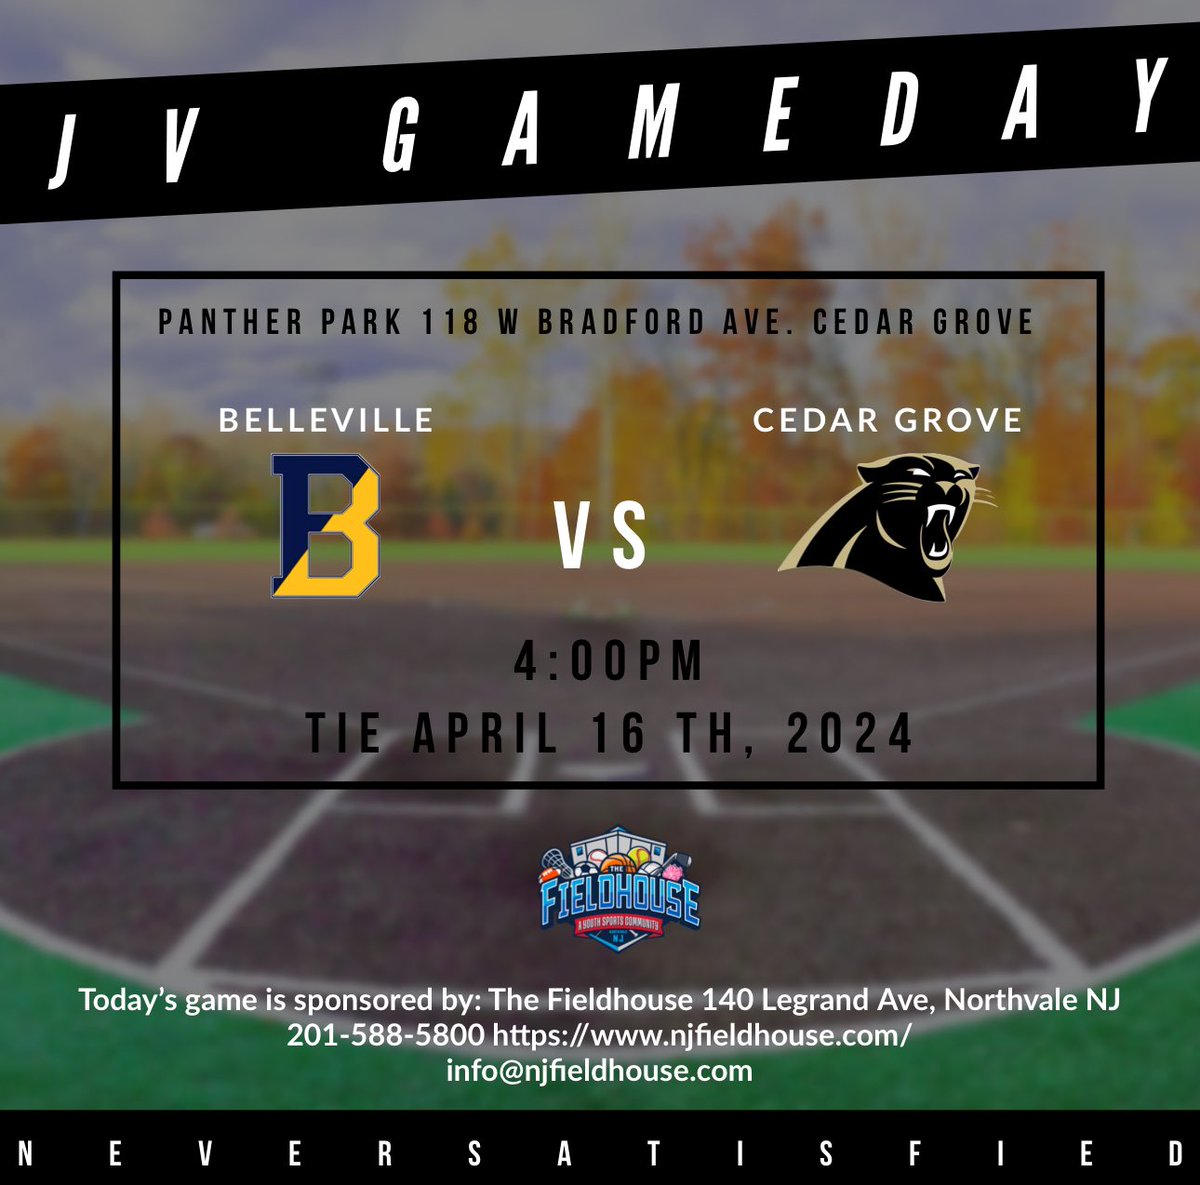 JV Game Day!

🆚 Belleville
🏟️ Panther Park
⏰ 4:00PM

Todays game is sponsored by: The Fieldhouse 

📍140 Legrand Ave, Northvale NJ
📞 201-588-5800
📲 njfieldhouse.com
📧 info@njfieldhouse.com